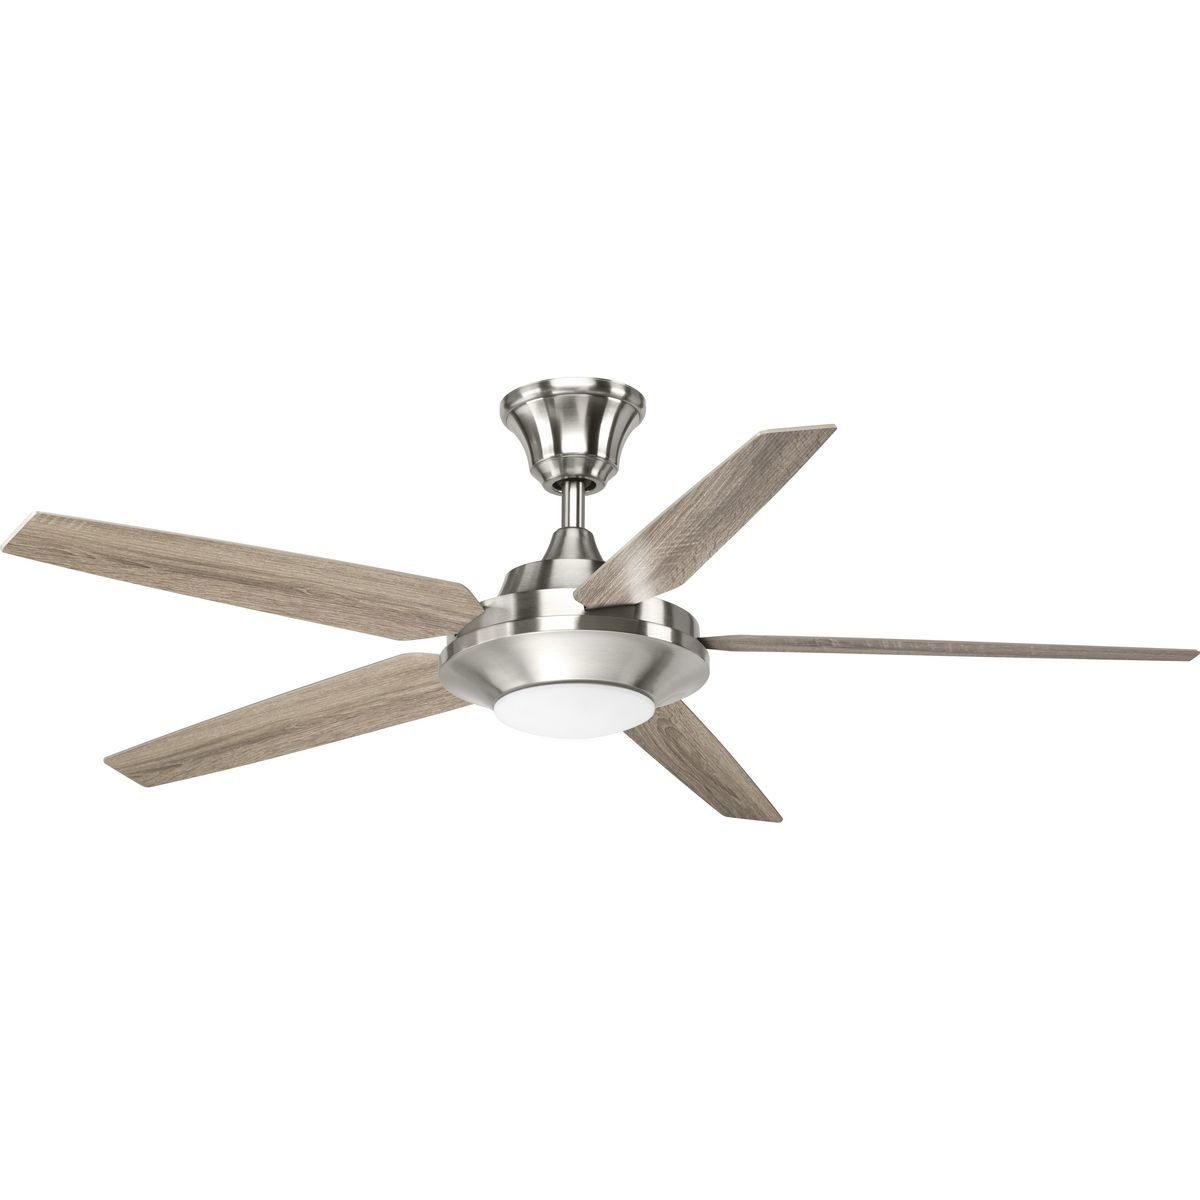 Dyno 5 Blade Ceiling Fans Regarding Well Liked 54" Searles 5 Blade Led Ceiling Fan With Remote, Light Kit Included (View 12 of 20)